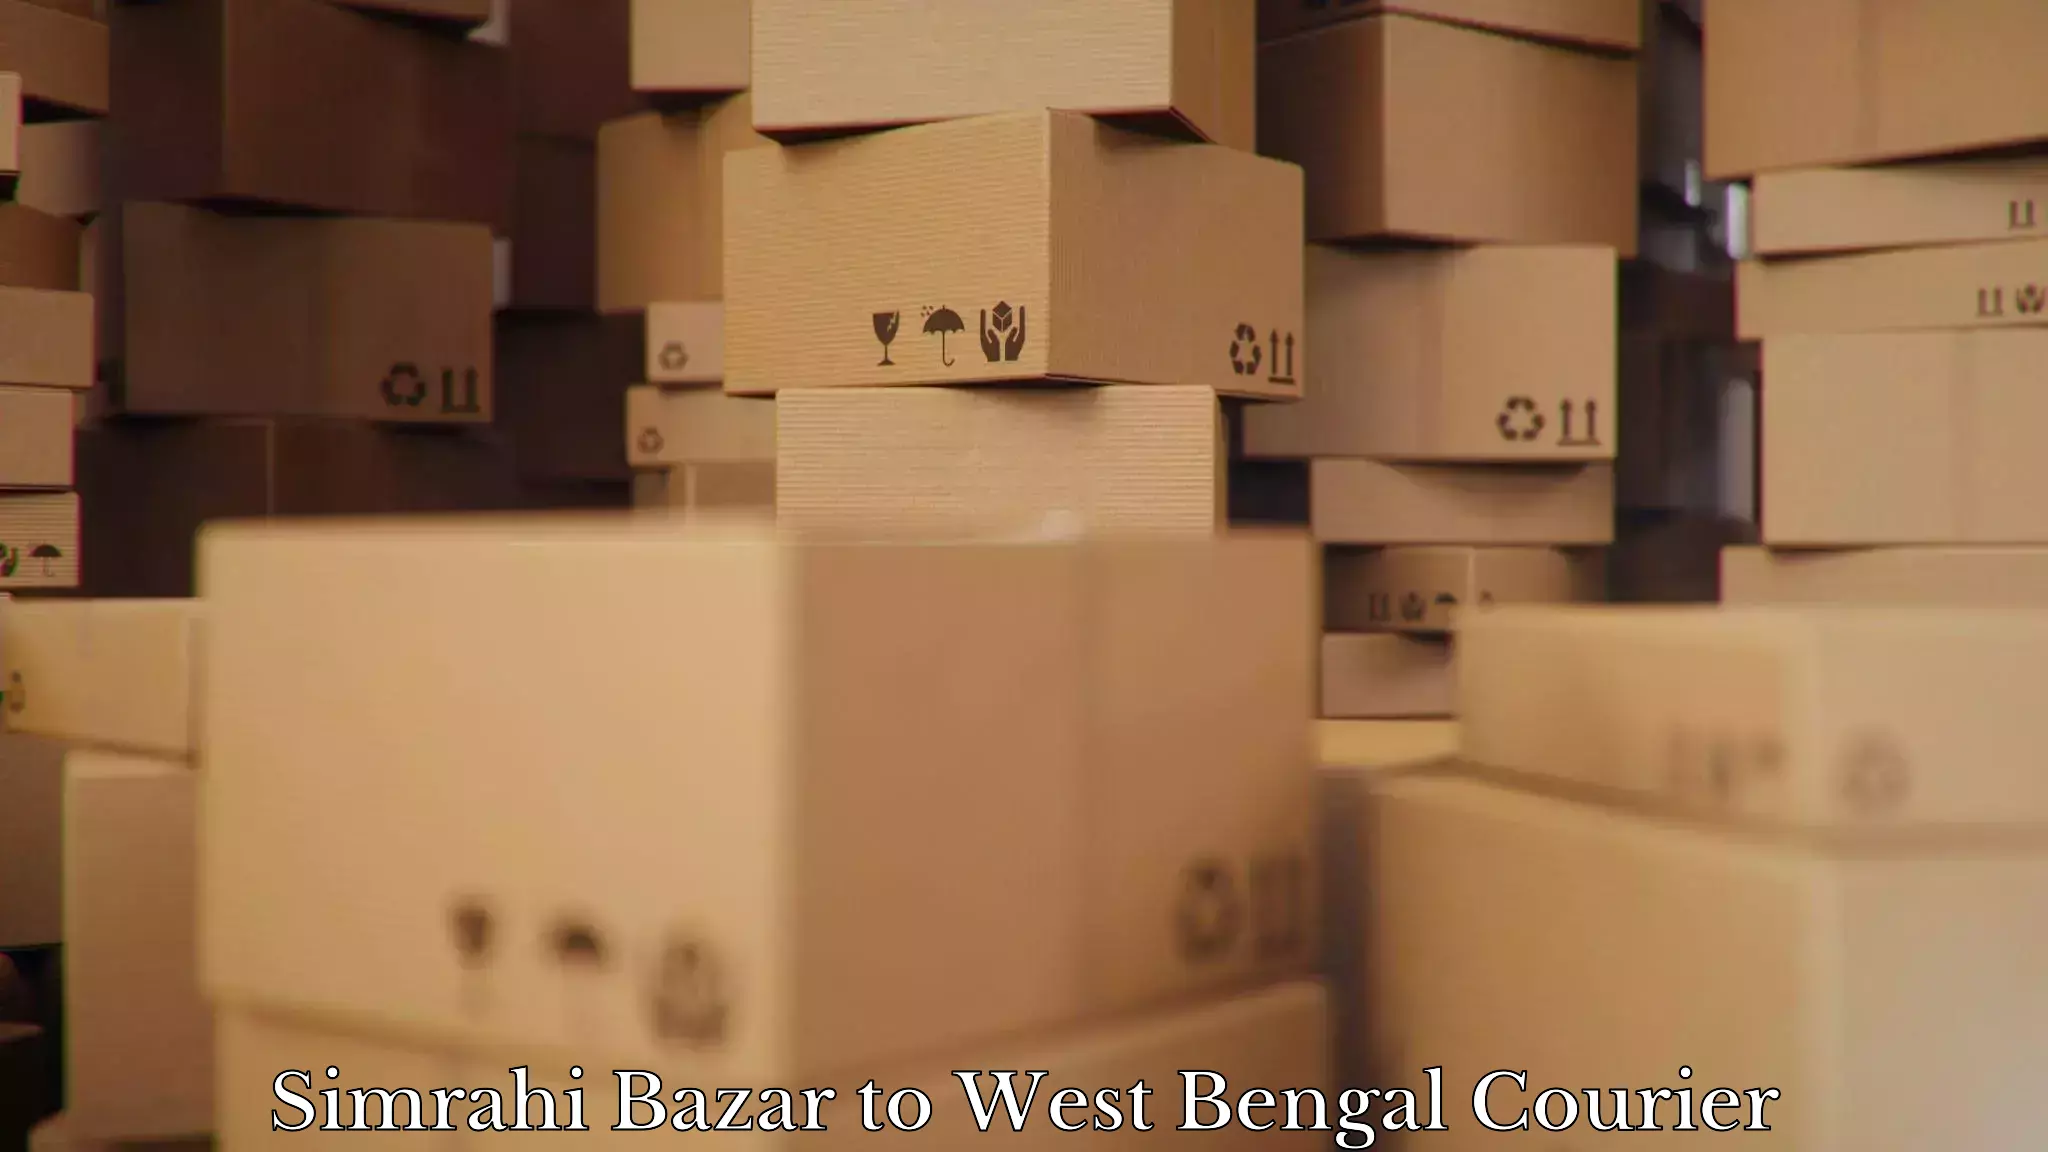 Moving and storage services in Simrahi Bazar to West Bengal